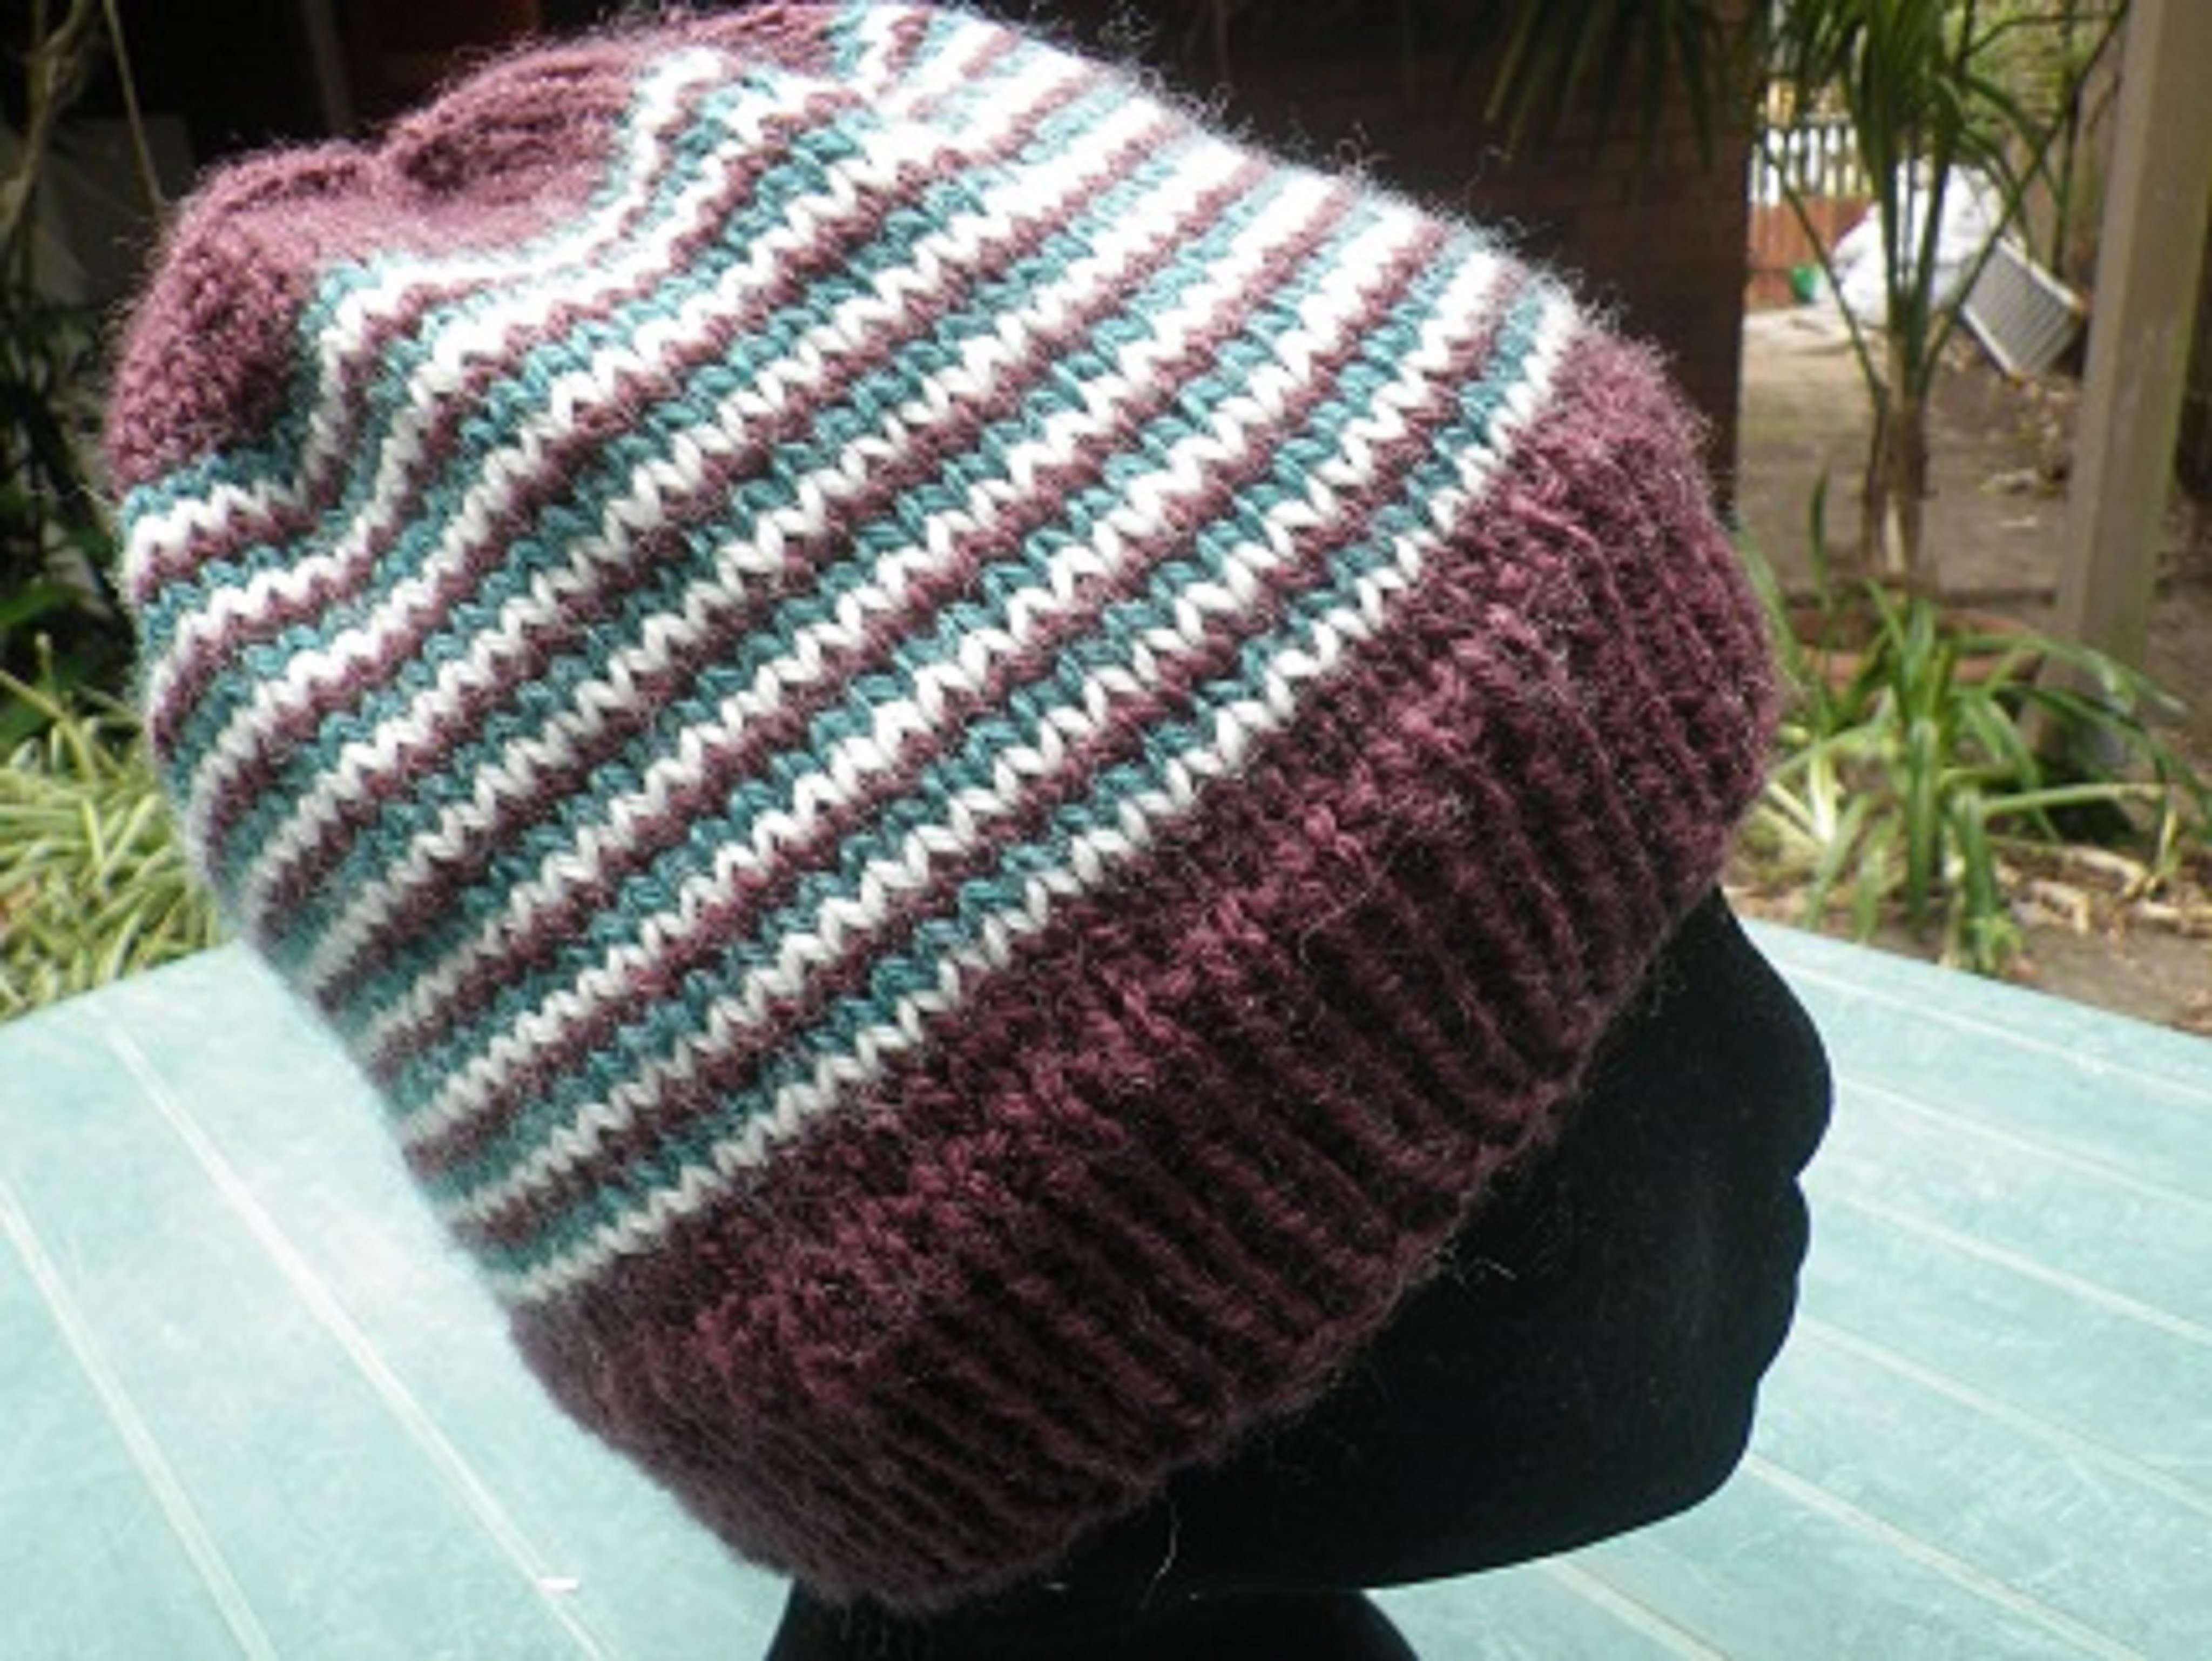 How to Begin Knitting Helix Stripes, Starting Helix Stripes, How to